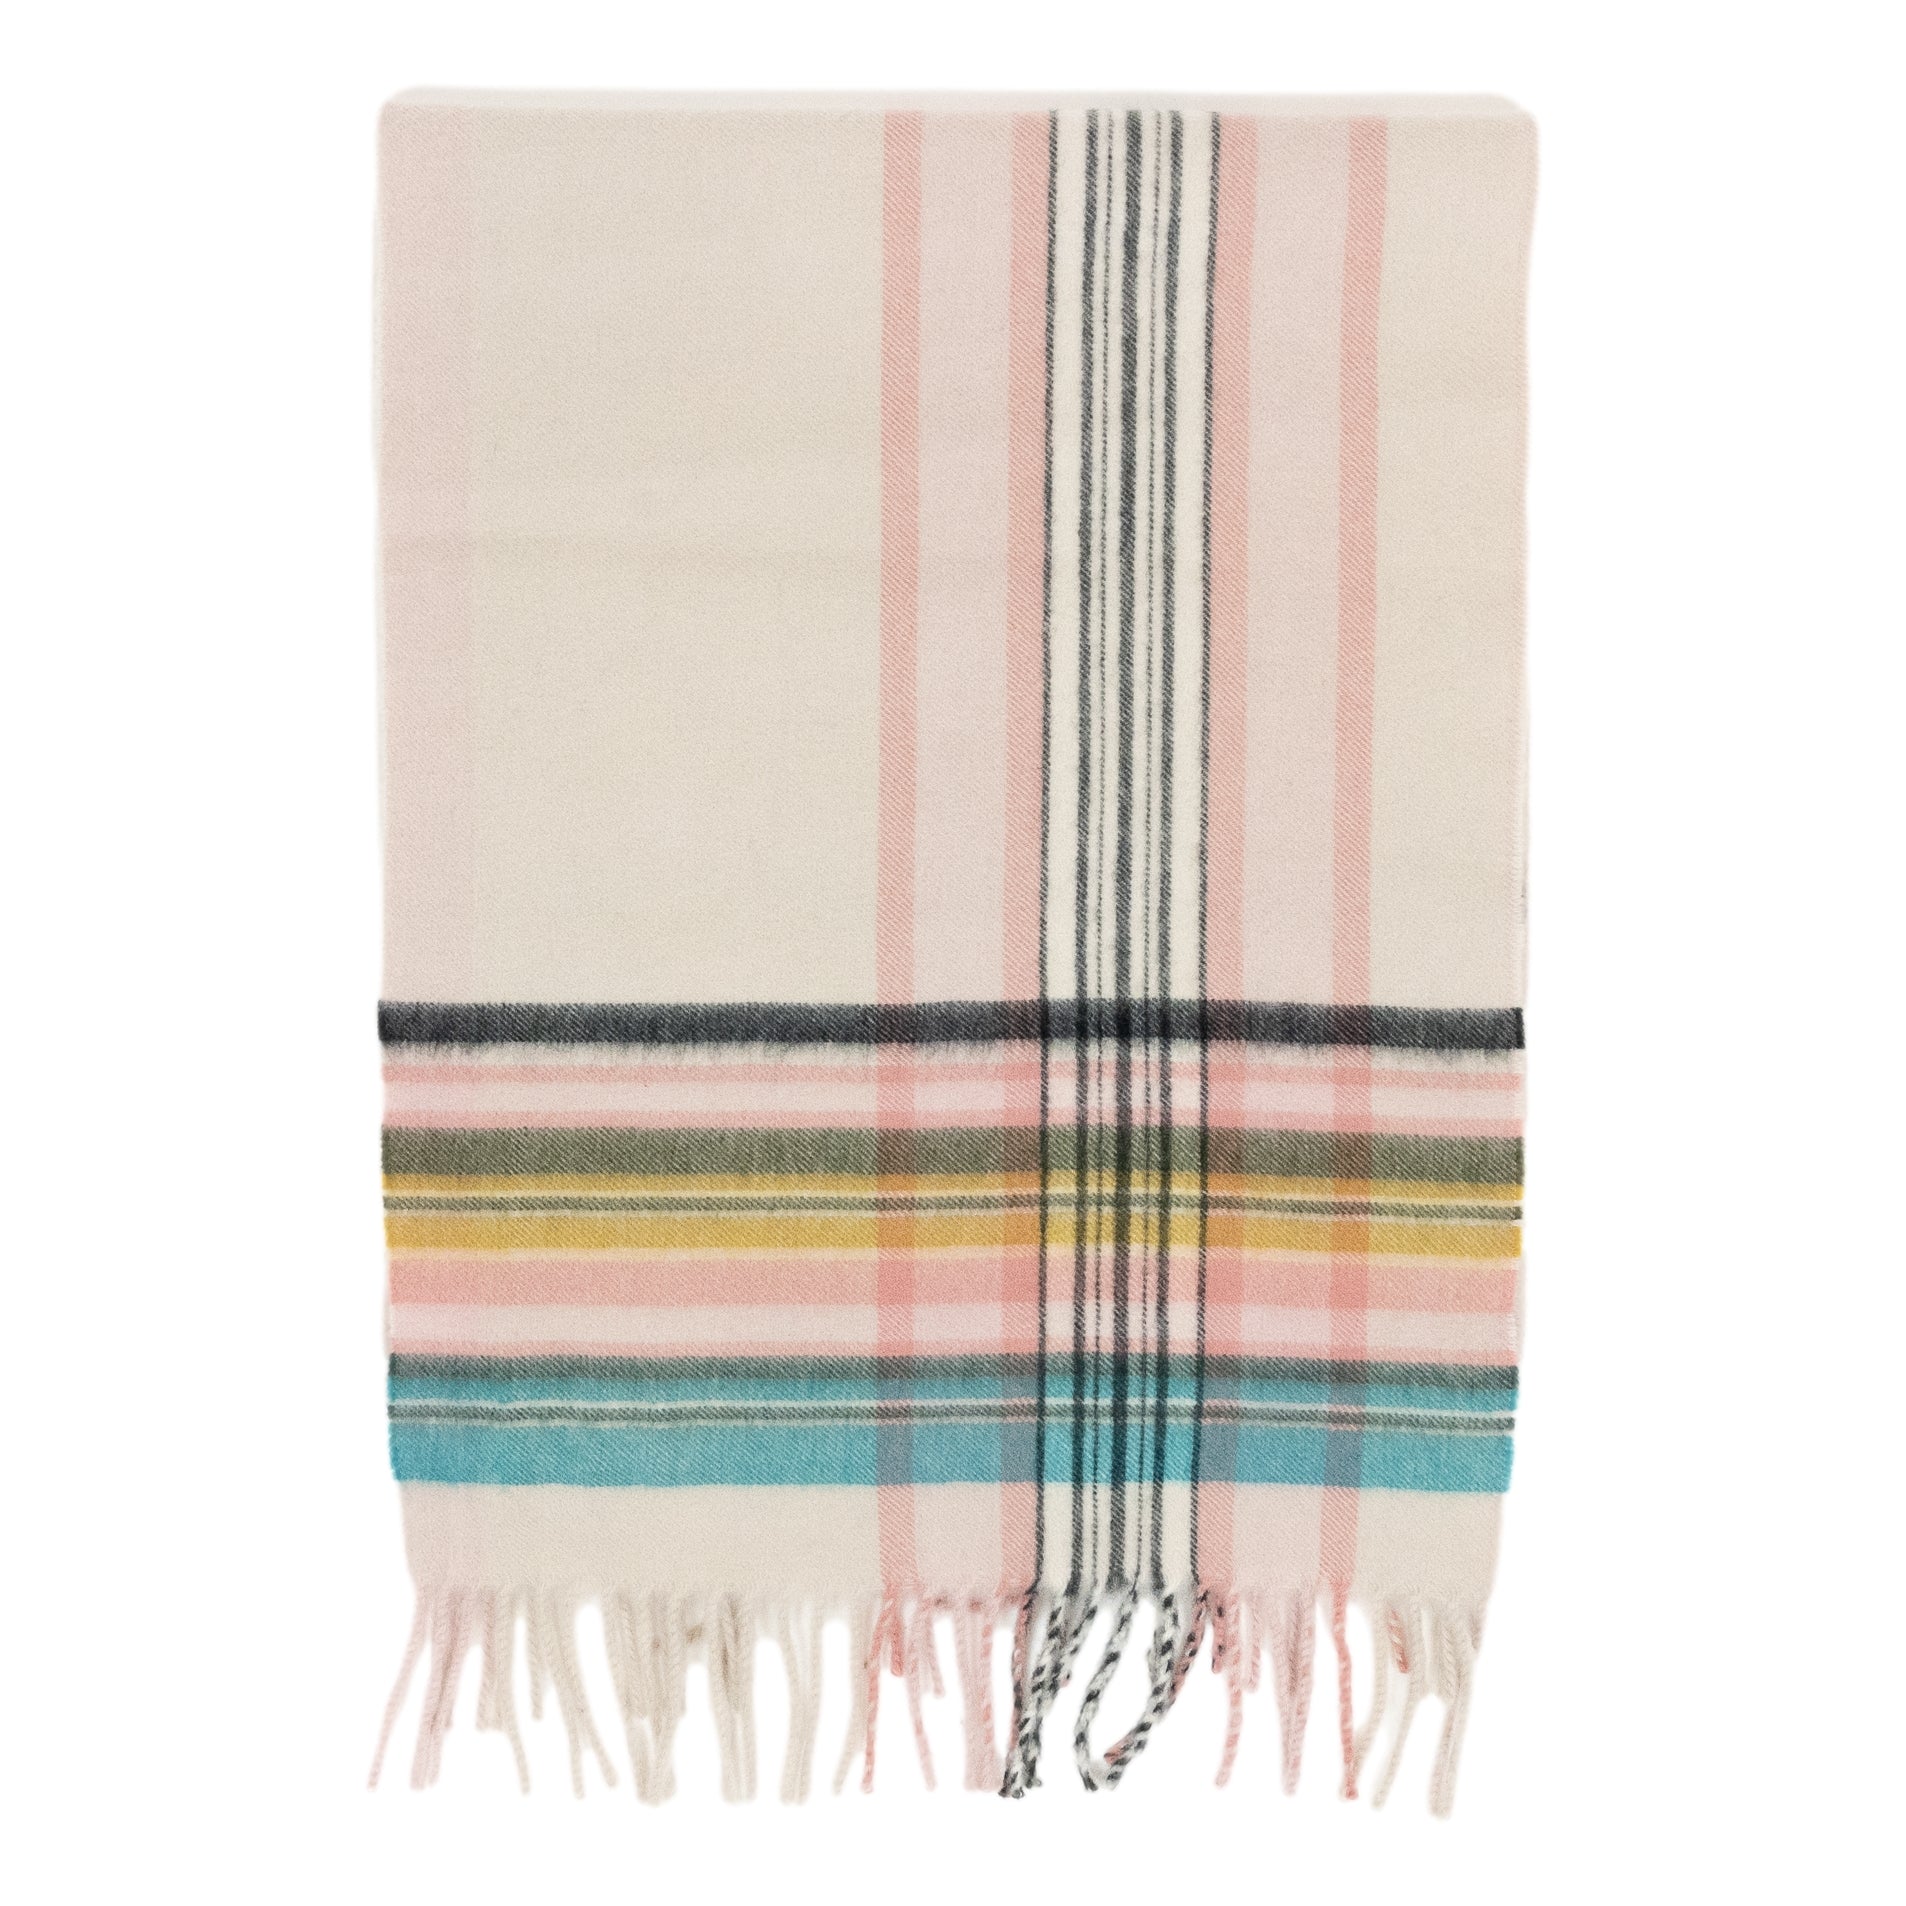 Oyster Pink Plaid Cashmere Scarf